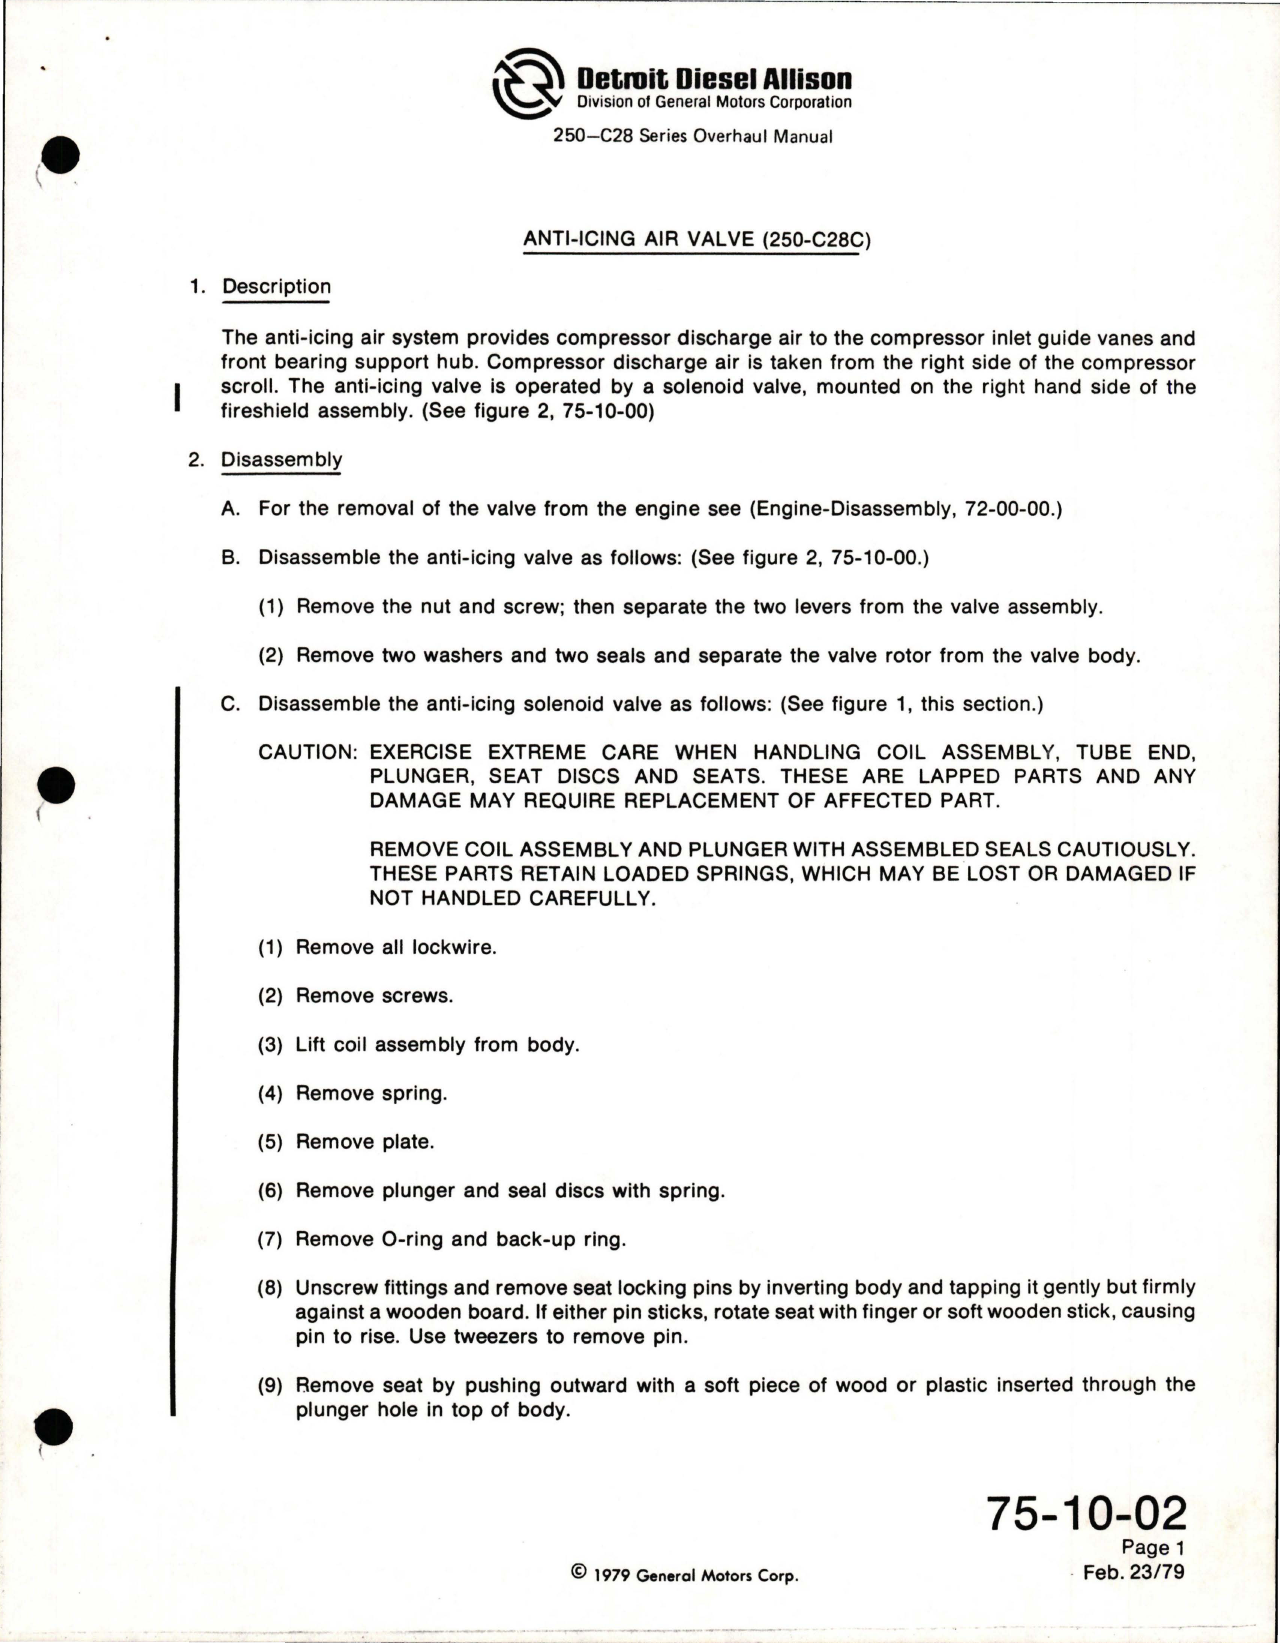 Sample page 1 from AirCorps Library document: Overhaul Manual for Anti-Icing Air Valve - 250-C28C Series 